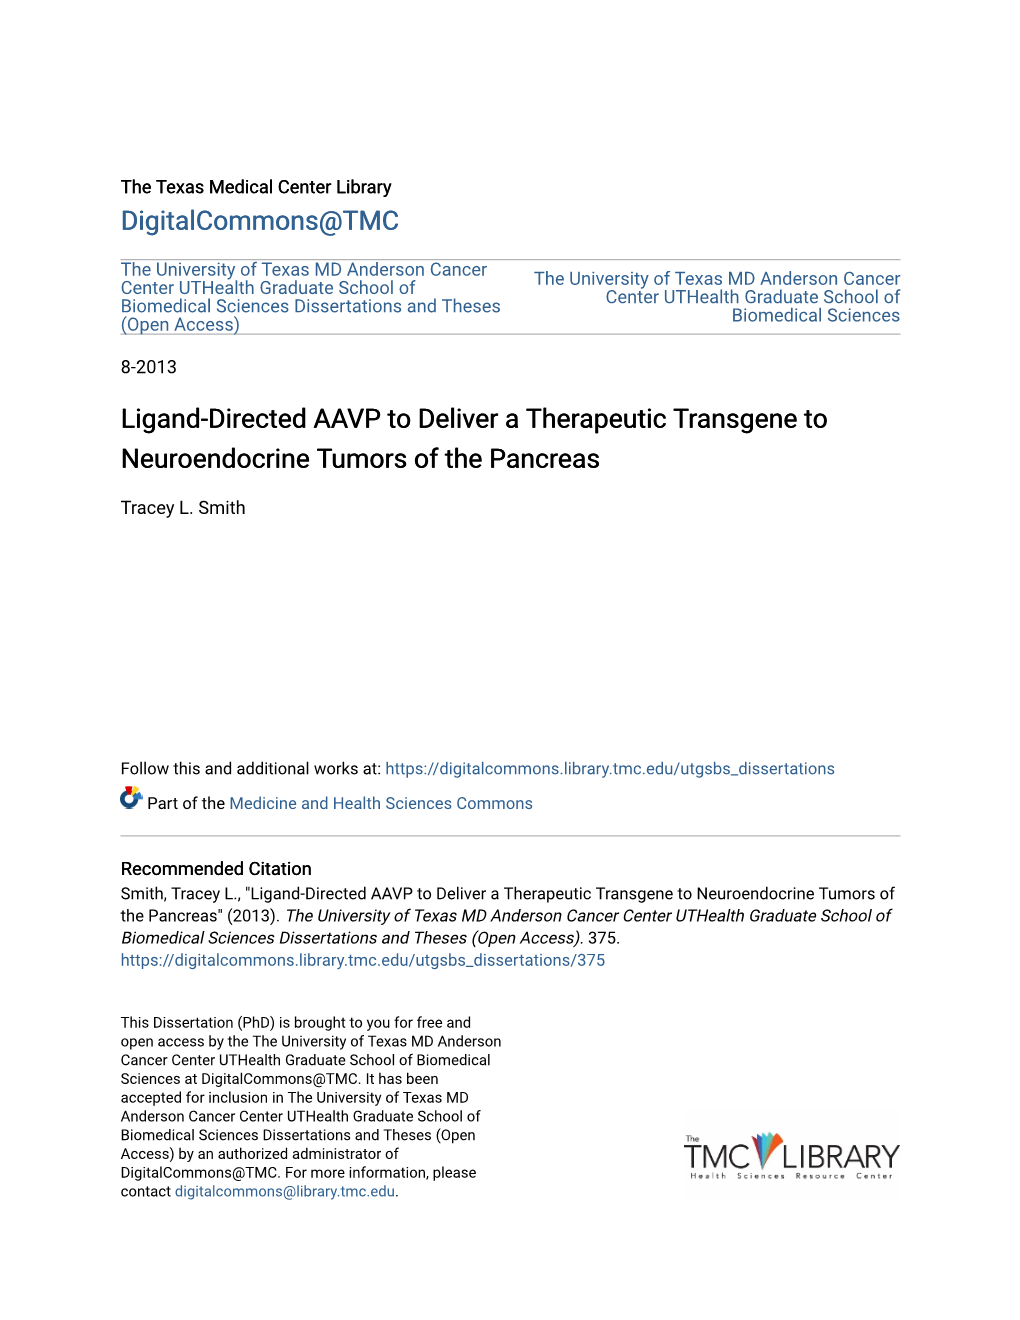 Ligand-Directed AAVP to Deliver a Therapeutic Transgene to Neuroendocrine Tumors of the Pancreas